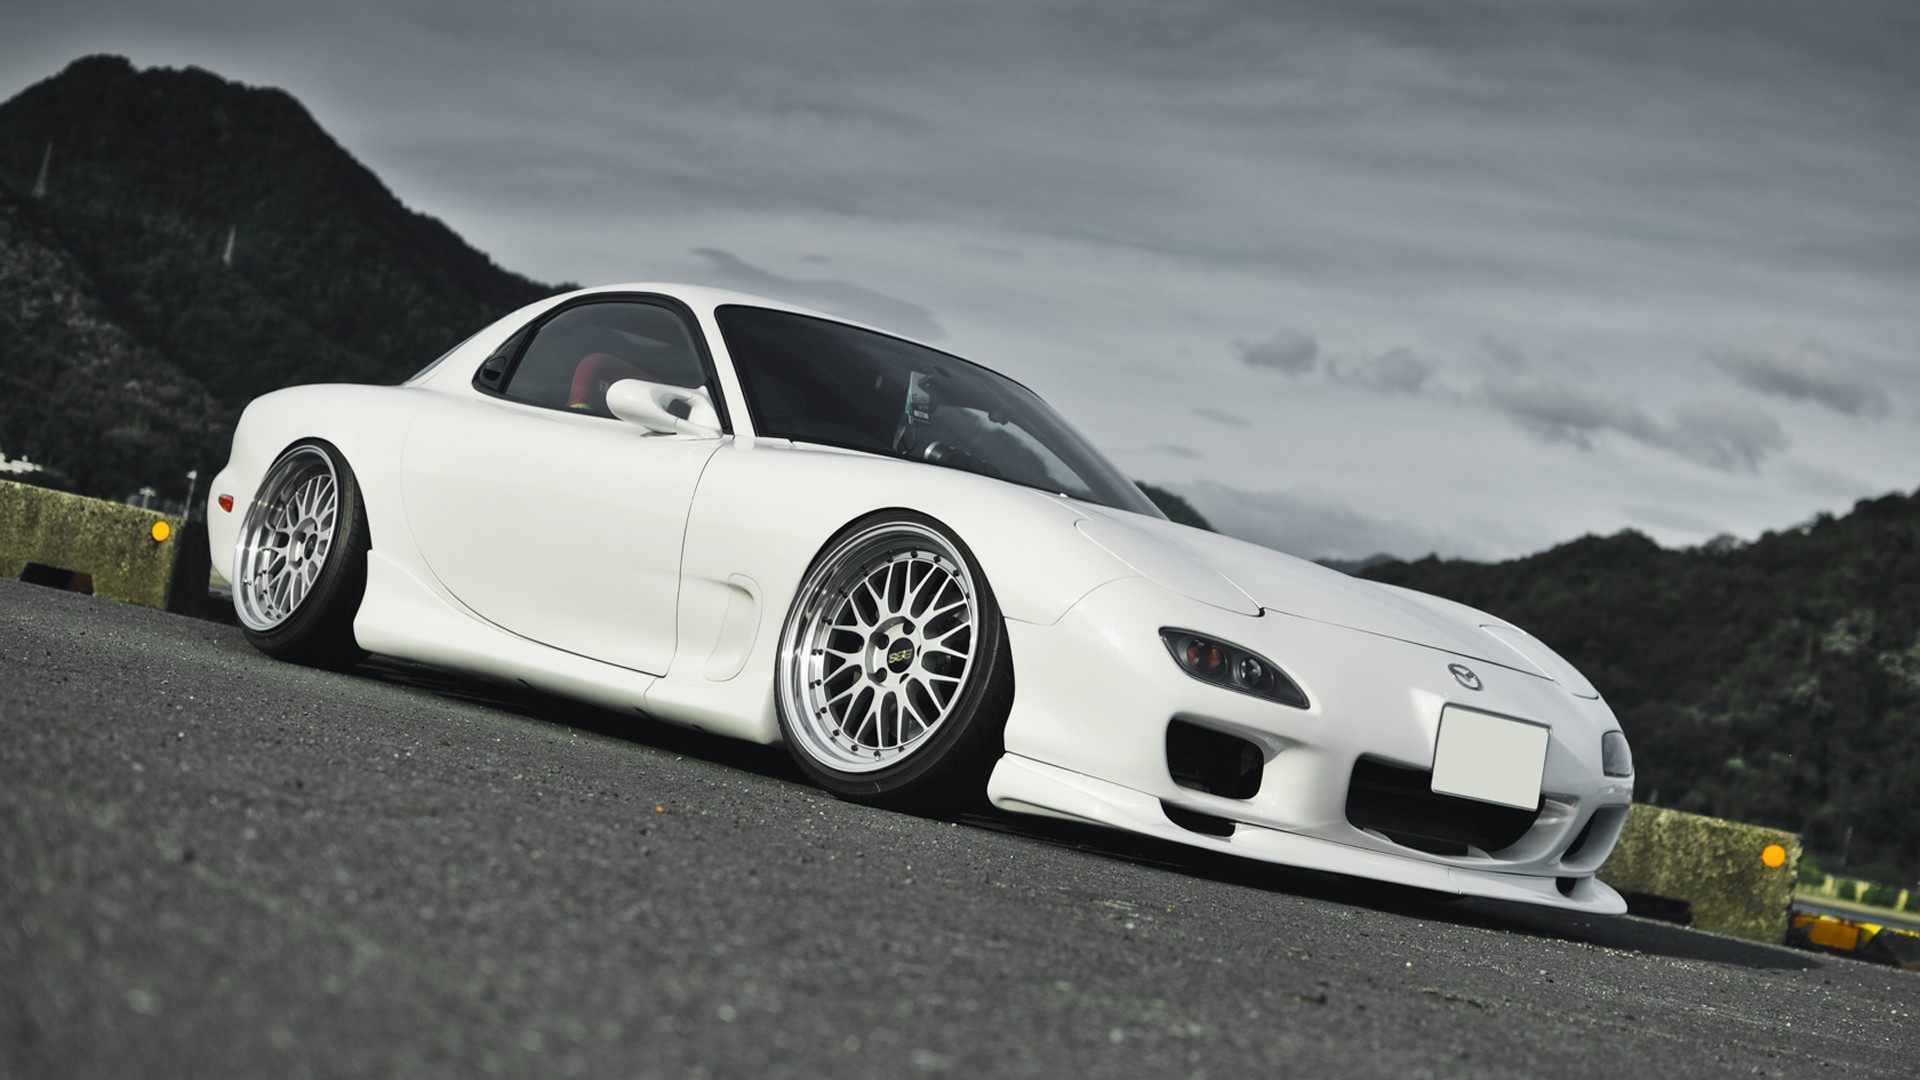 Picture Size Below To Mazda Rx7 Drift Wallpaper And Save It